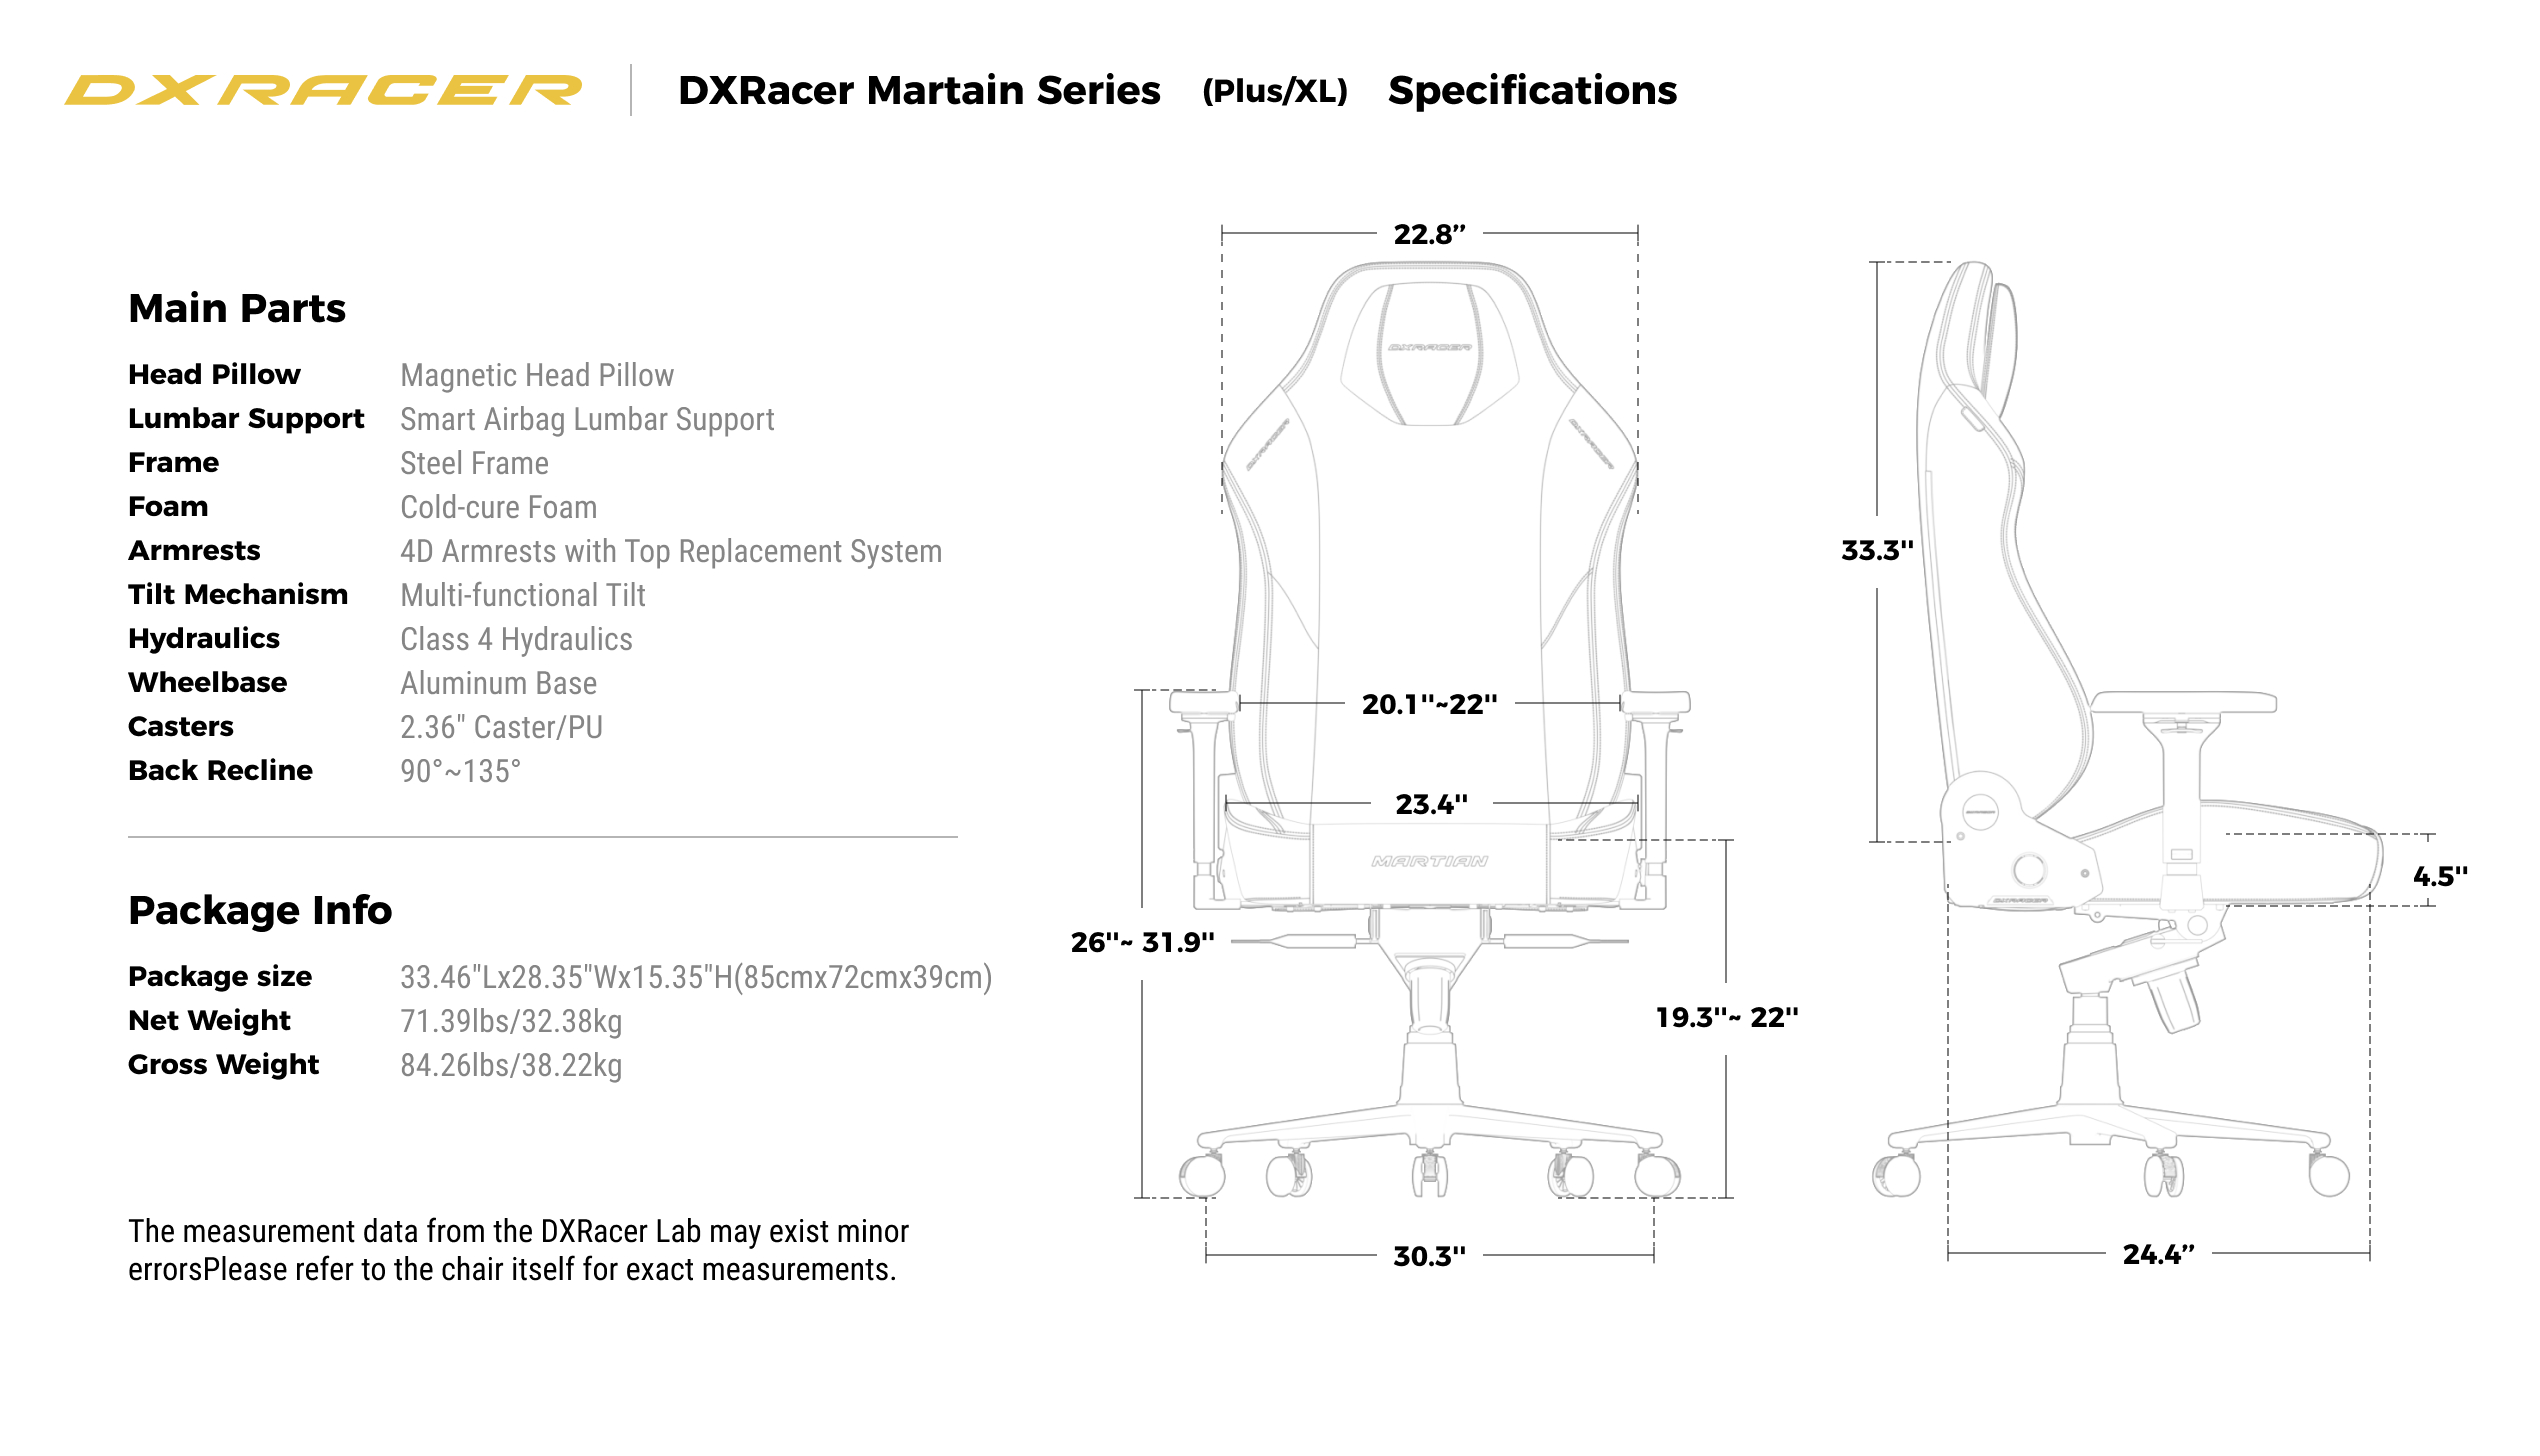 Specifications (Plus/XL)